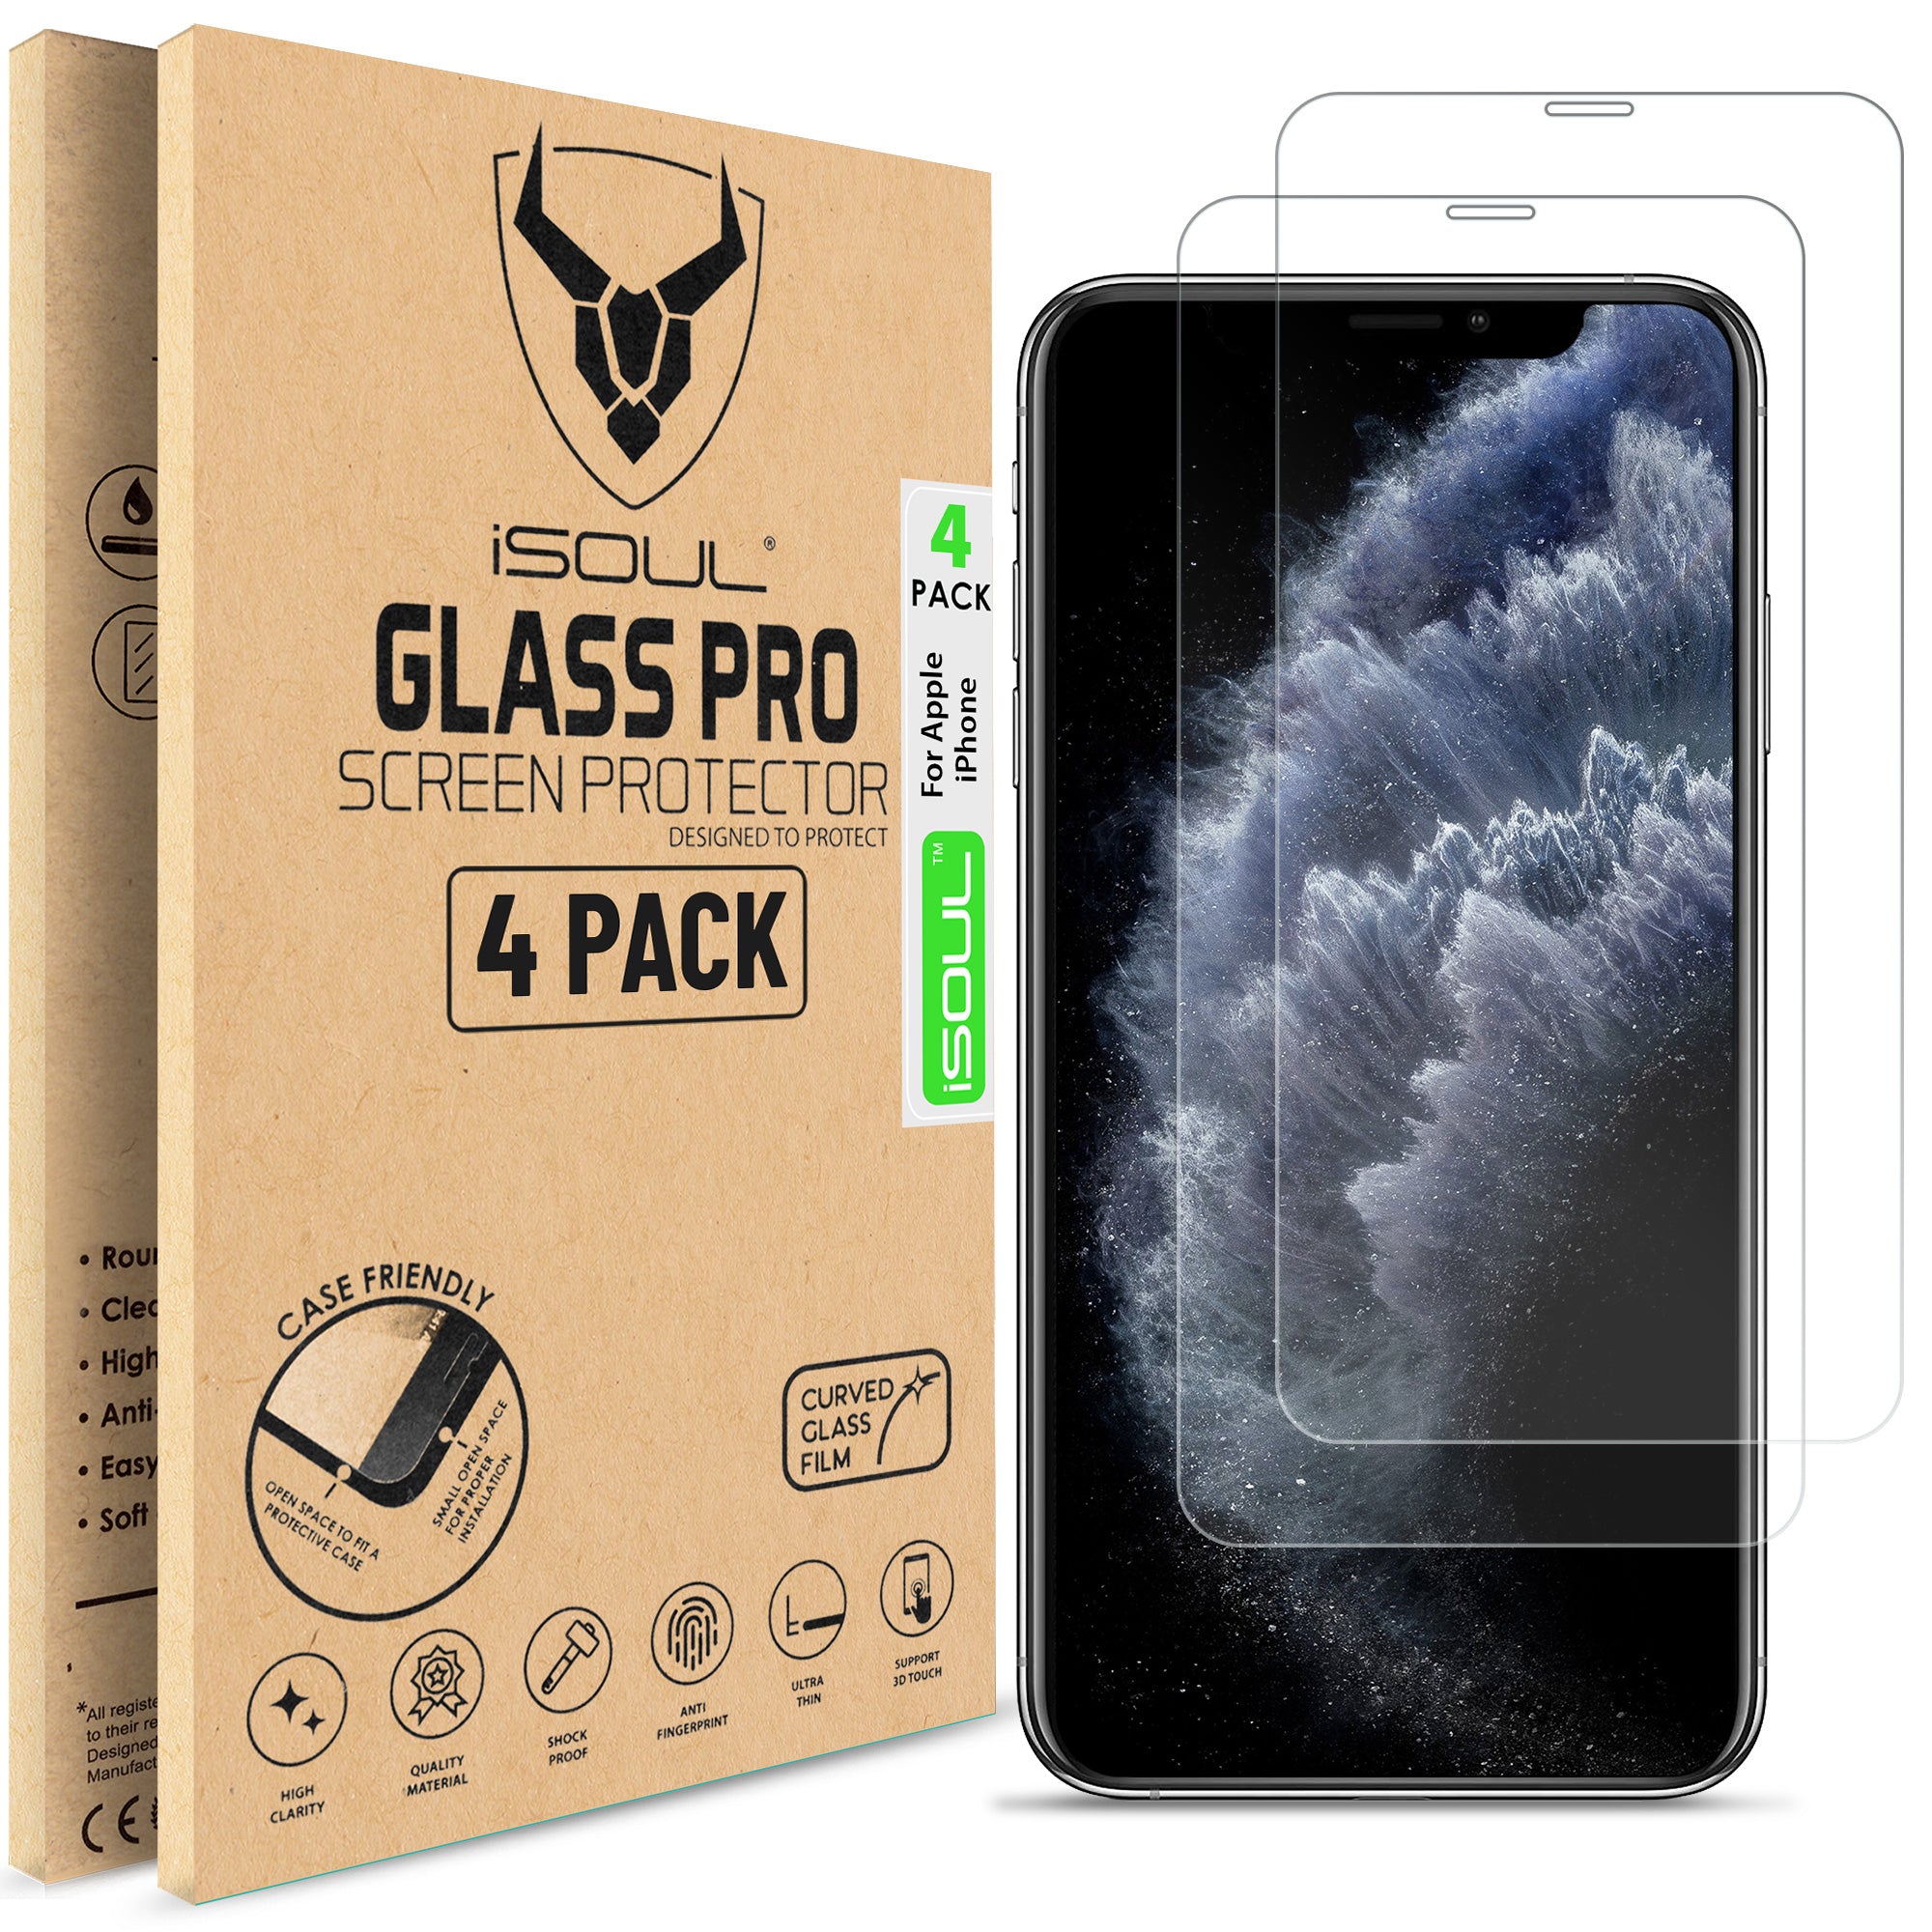 Screen Protector for Apple iPhone 11 Pro Max / XS Max 6.5" Tempered Glass